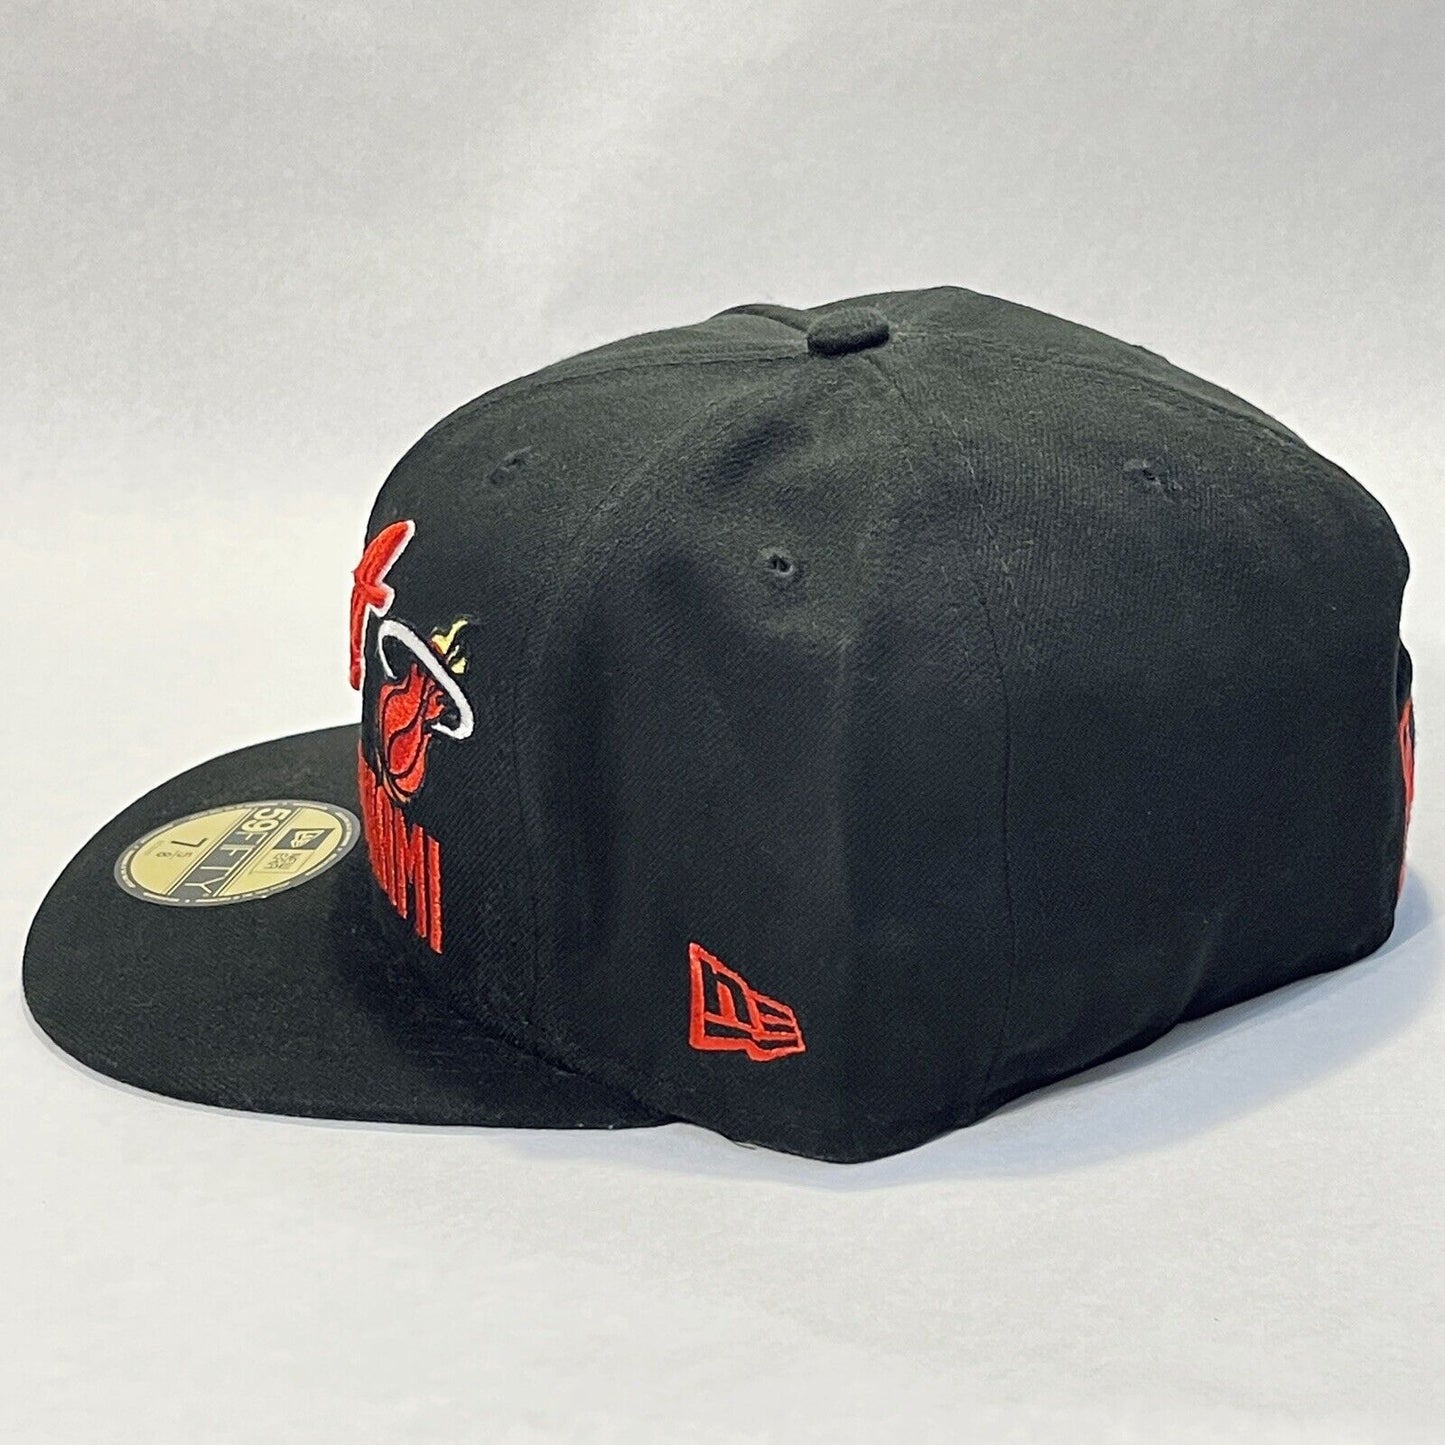 Miami Heat Hat New Era 9FIFTY Fitted Cap 7 5/8 Black Red NBA Basketball Mens